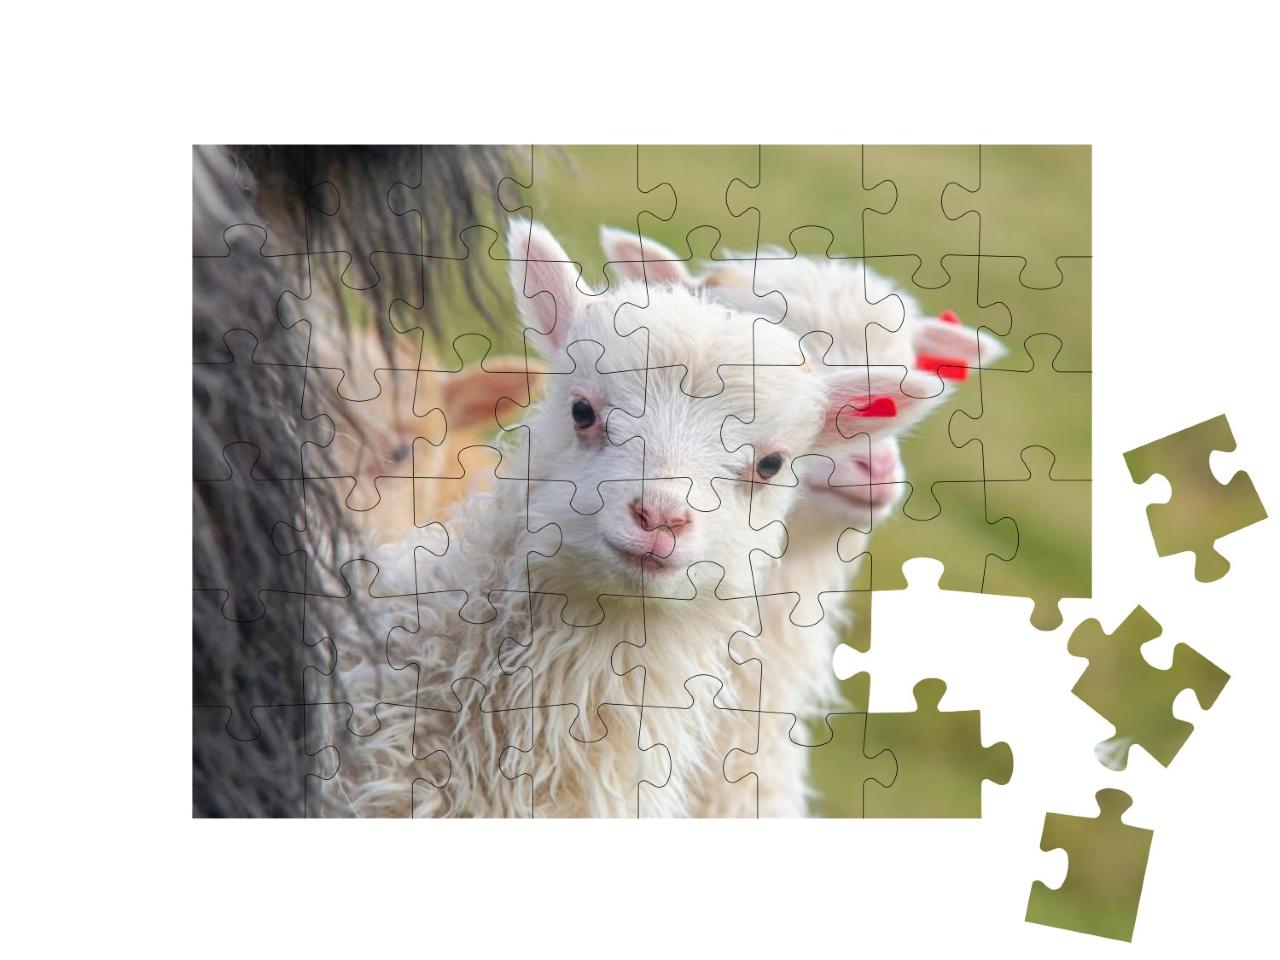 Faroe Islands Animals, Sheep & Lambs... Jigsaw Puzzle with 48 pieces